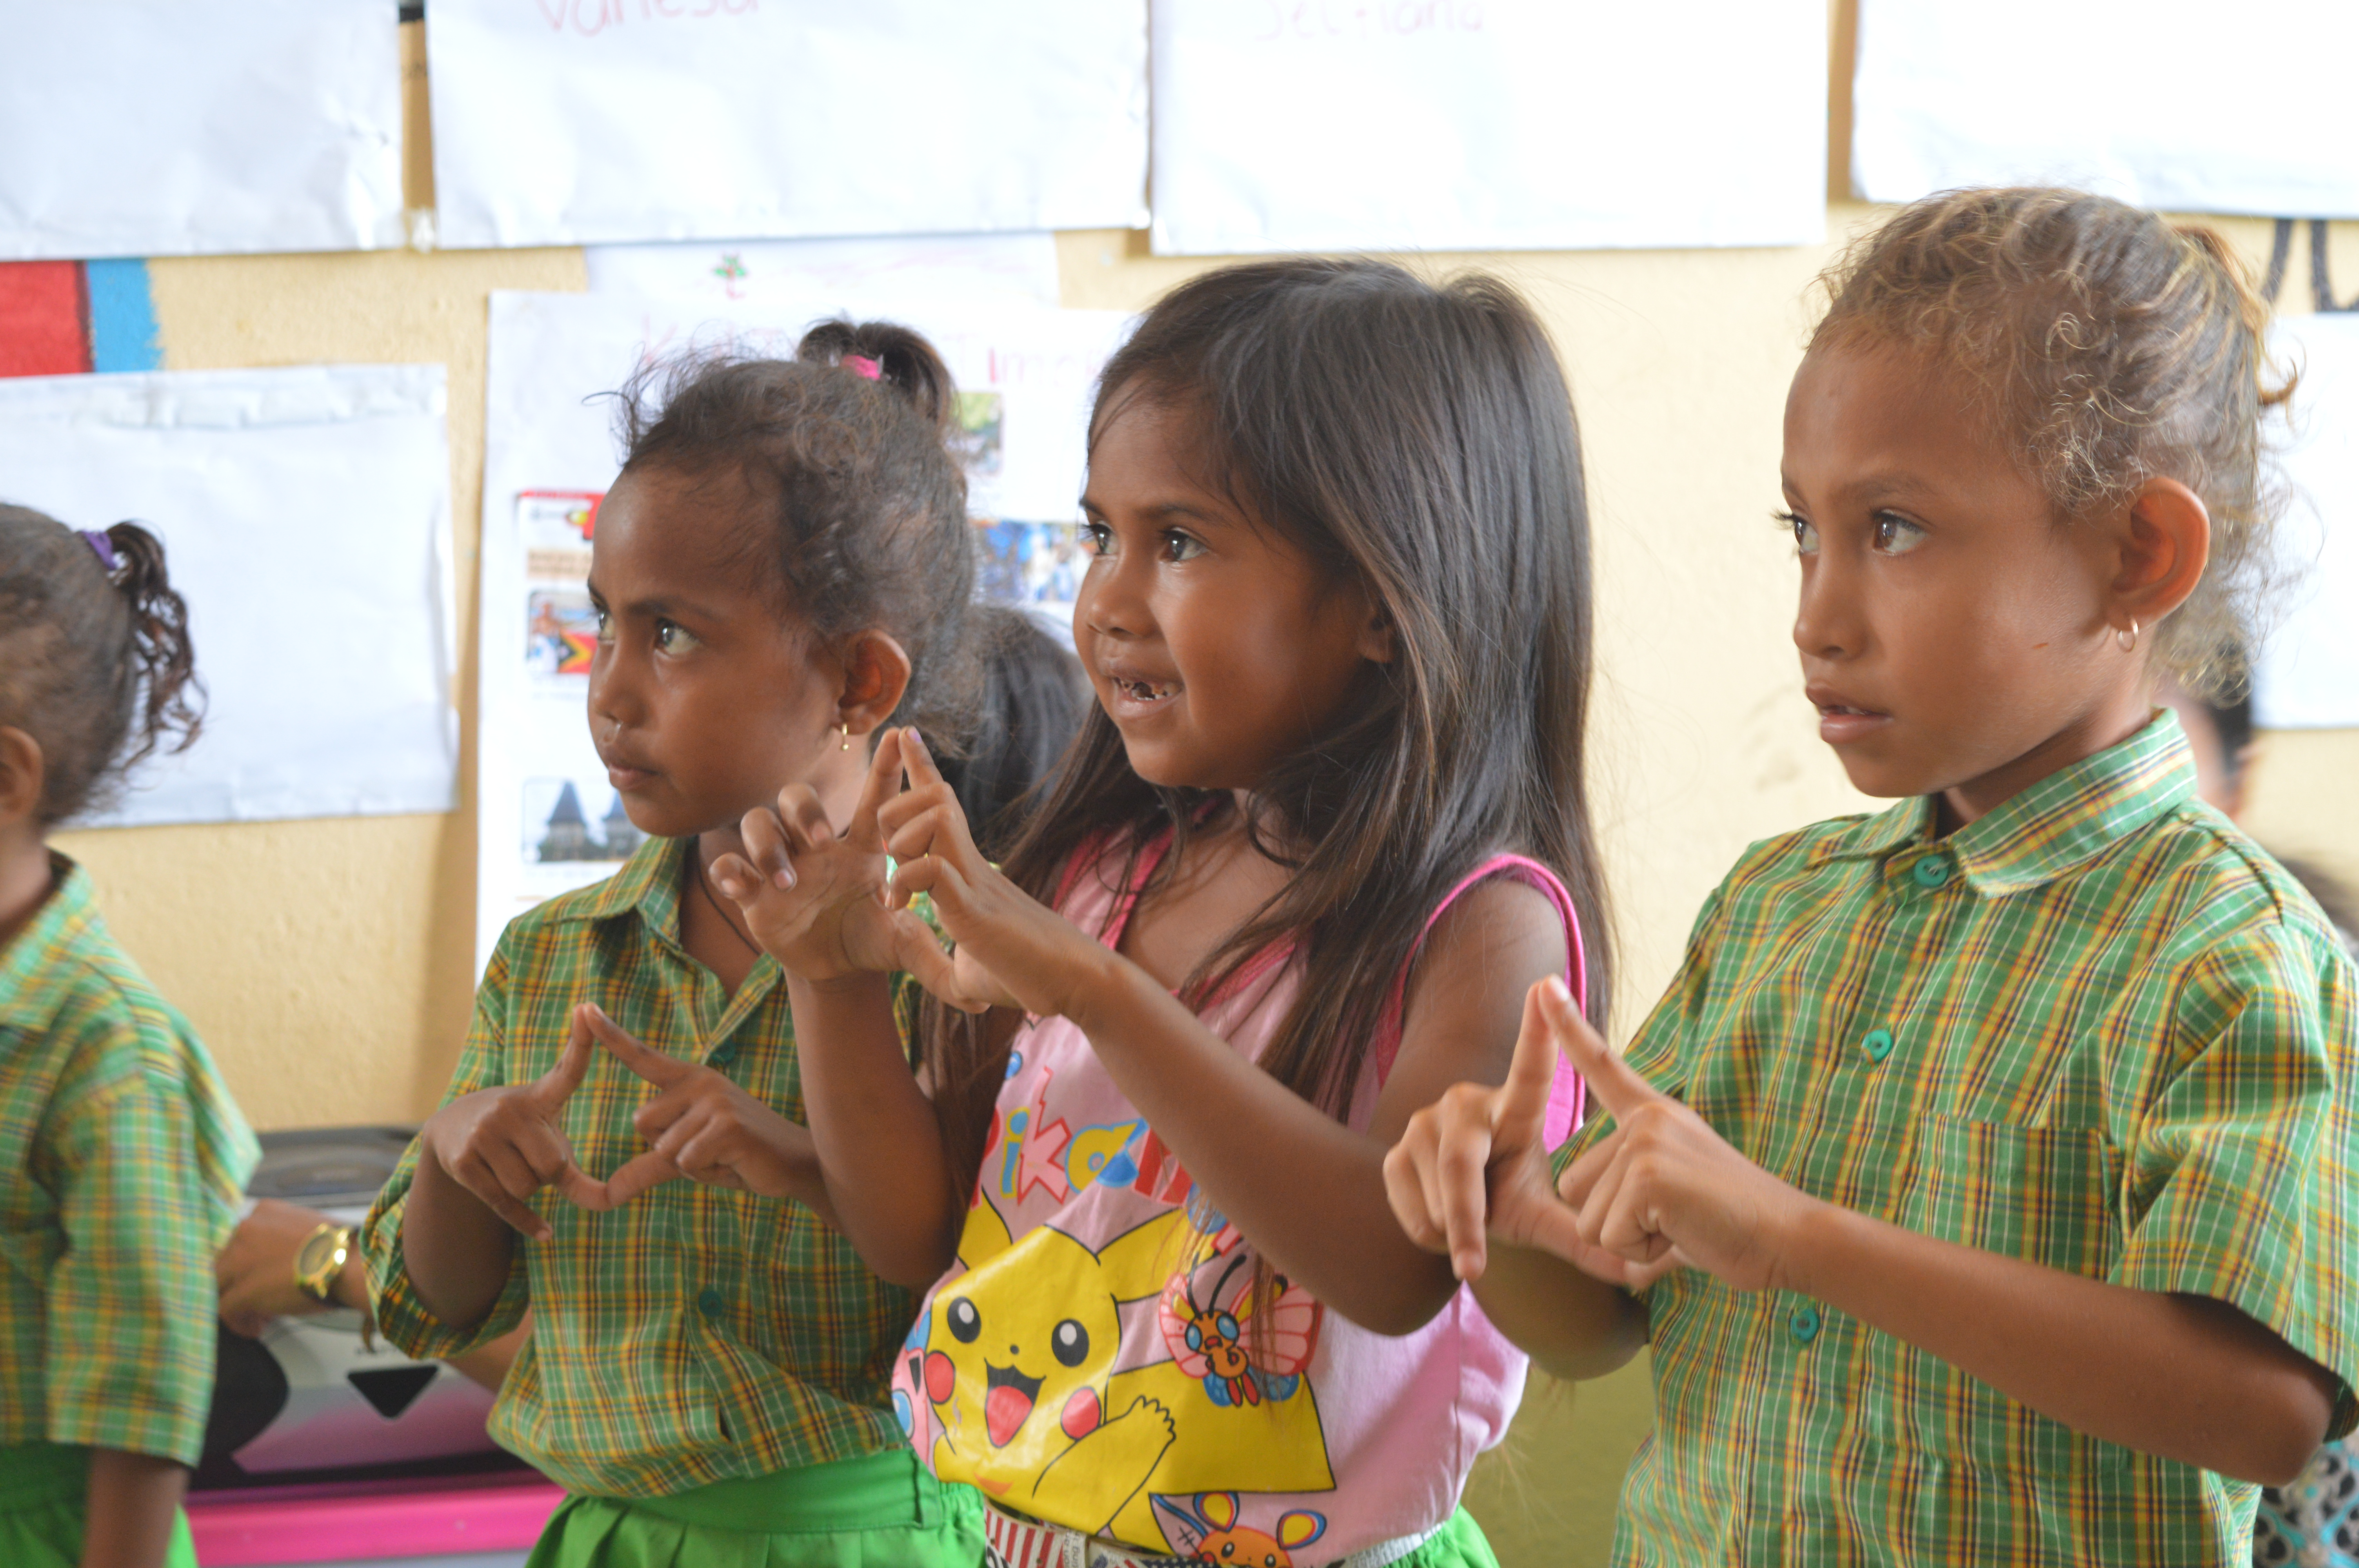 Three primary school children looking away from the camera are singing with their hands in shape of diamond in front of them.